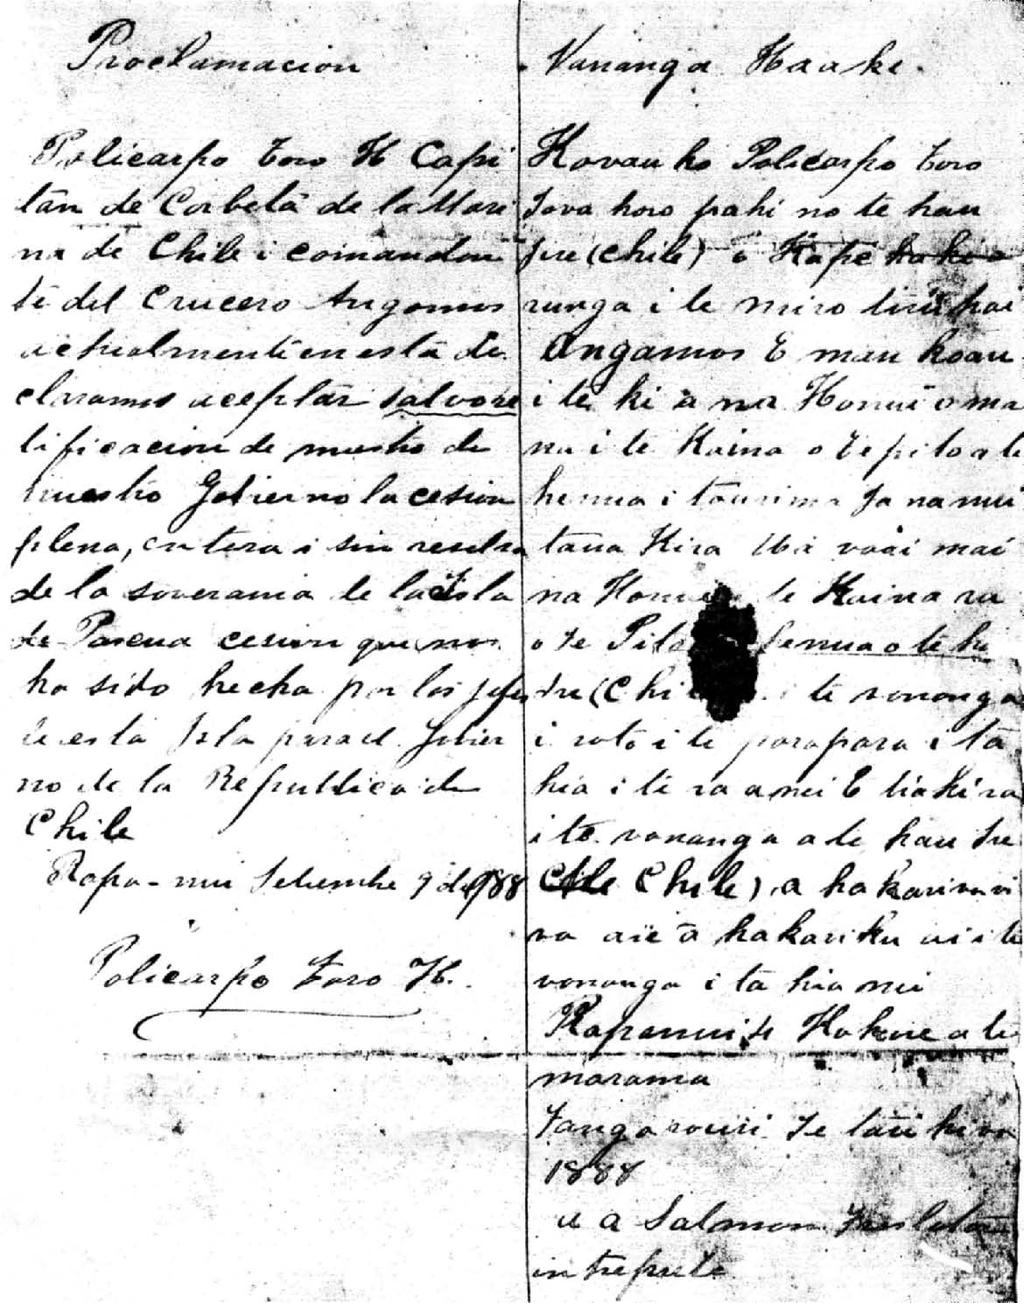 FIGURE 1(b). Proclamation : Proclamacion and Vananga Haaki, Salomon, A.A. [for Captain Policarpo Toro, Chilean Navy] (1888) (National Historic Archives of Chile). derive the intention of the chiefs.